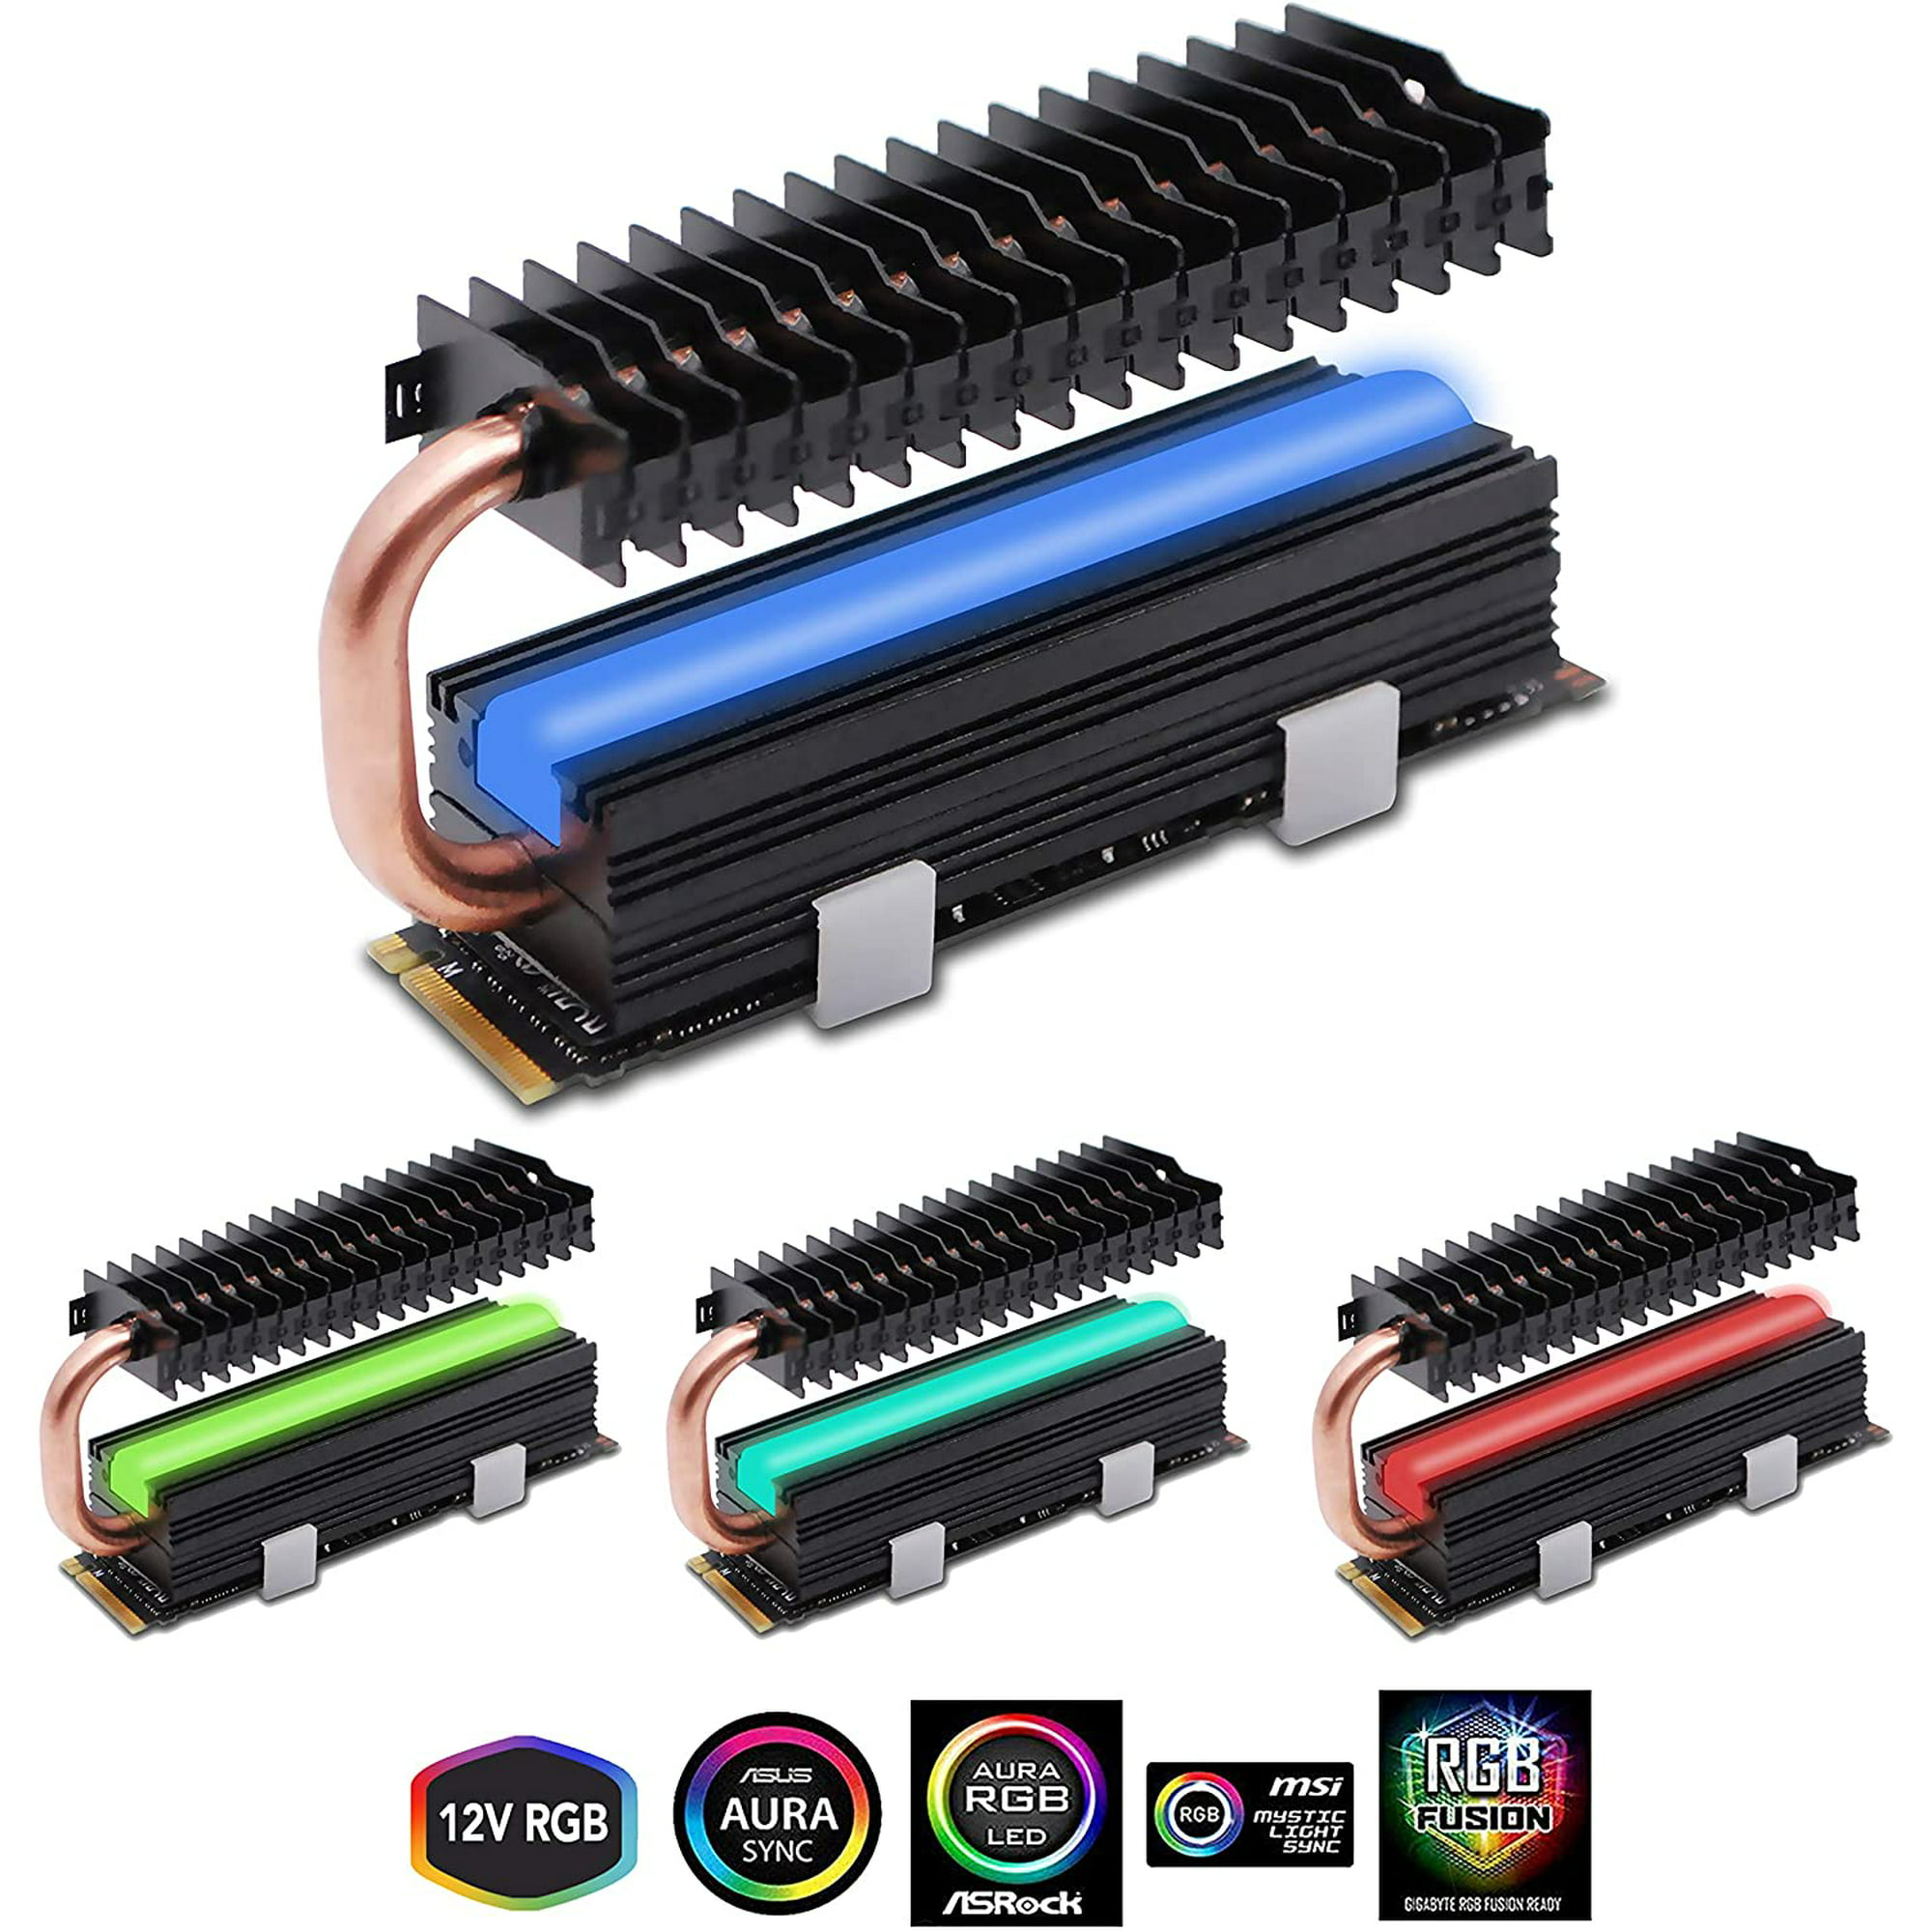 5V 3-Pin ARGB SATA NVMe NGFF M.2 Heatsink SSD Cooler for 2280 M.2 SSD with Thermal Pad SSD Not Included EZDIY-FAB M.2 Heatsink with Heatpipe 